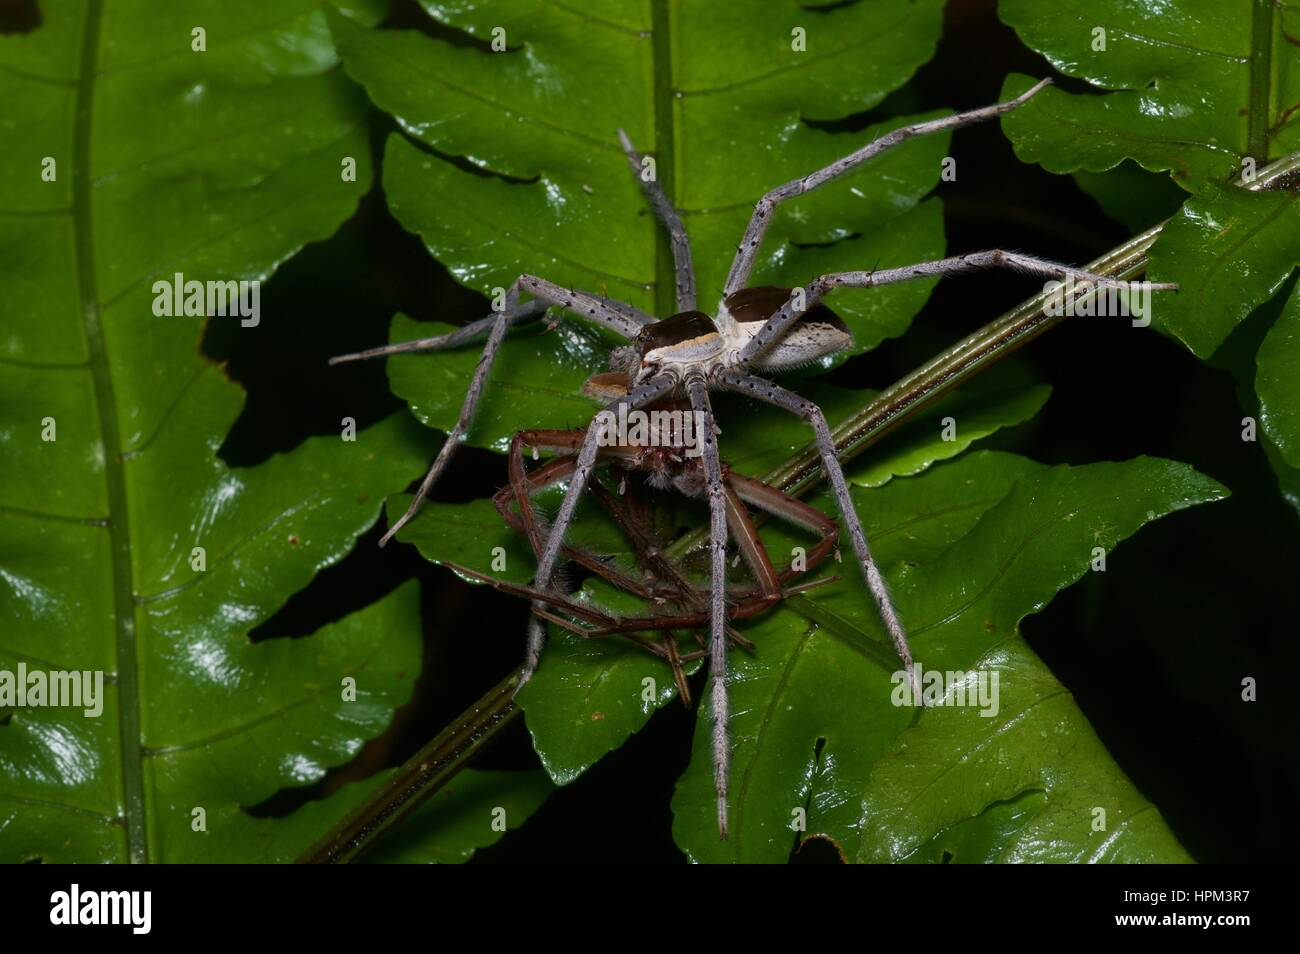 A Common White-flanked Water Spider (Nilus albocinctus) eating another spider in the rainforest in Ulu Semenyih, Selangor, Malaysia Stock Photo